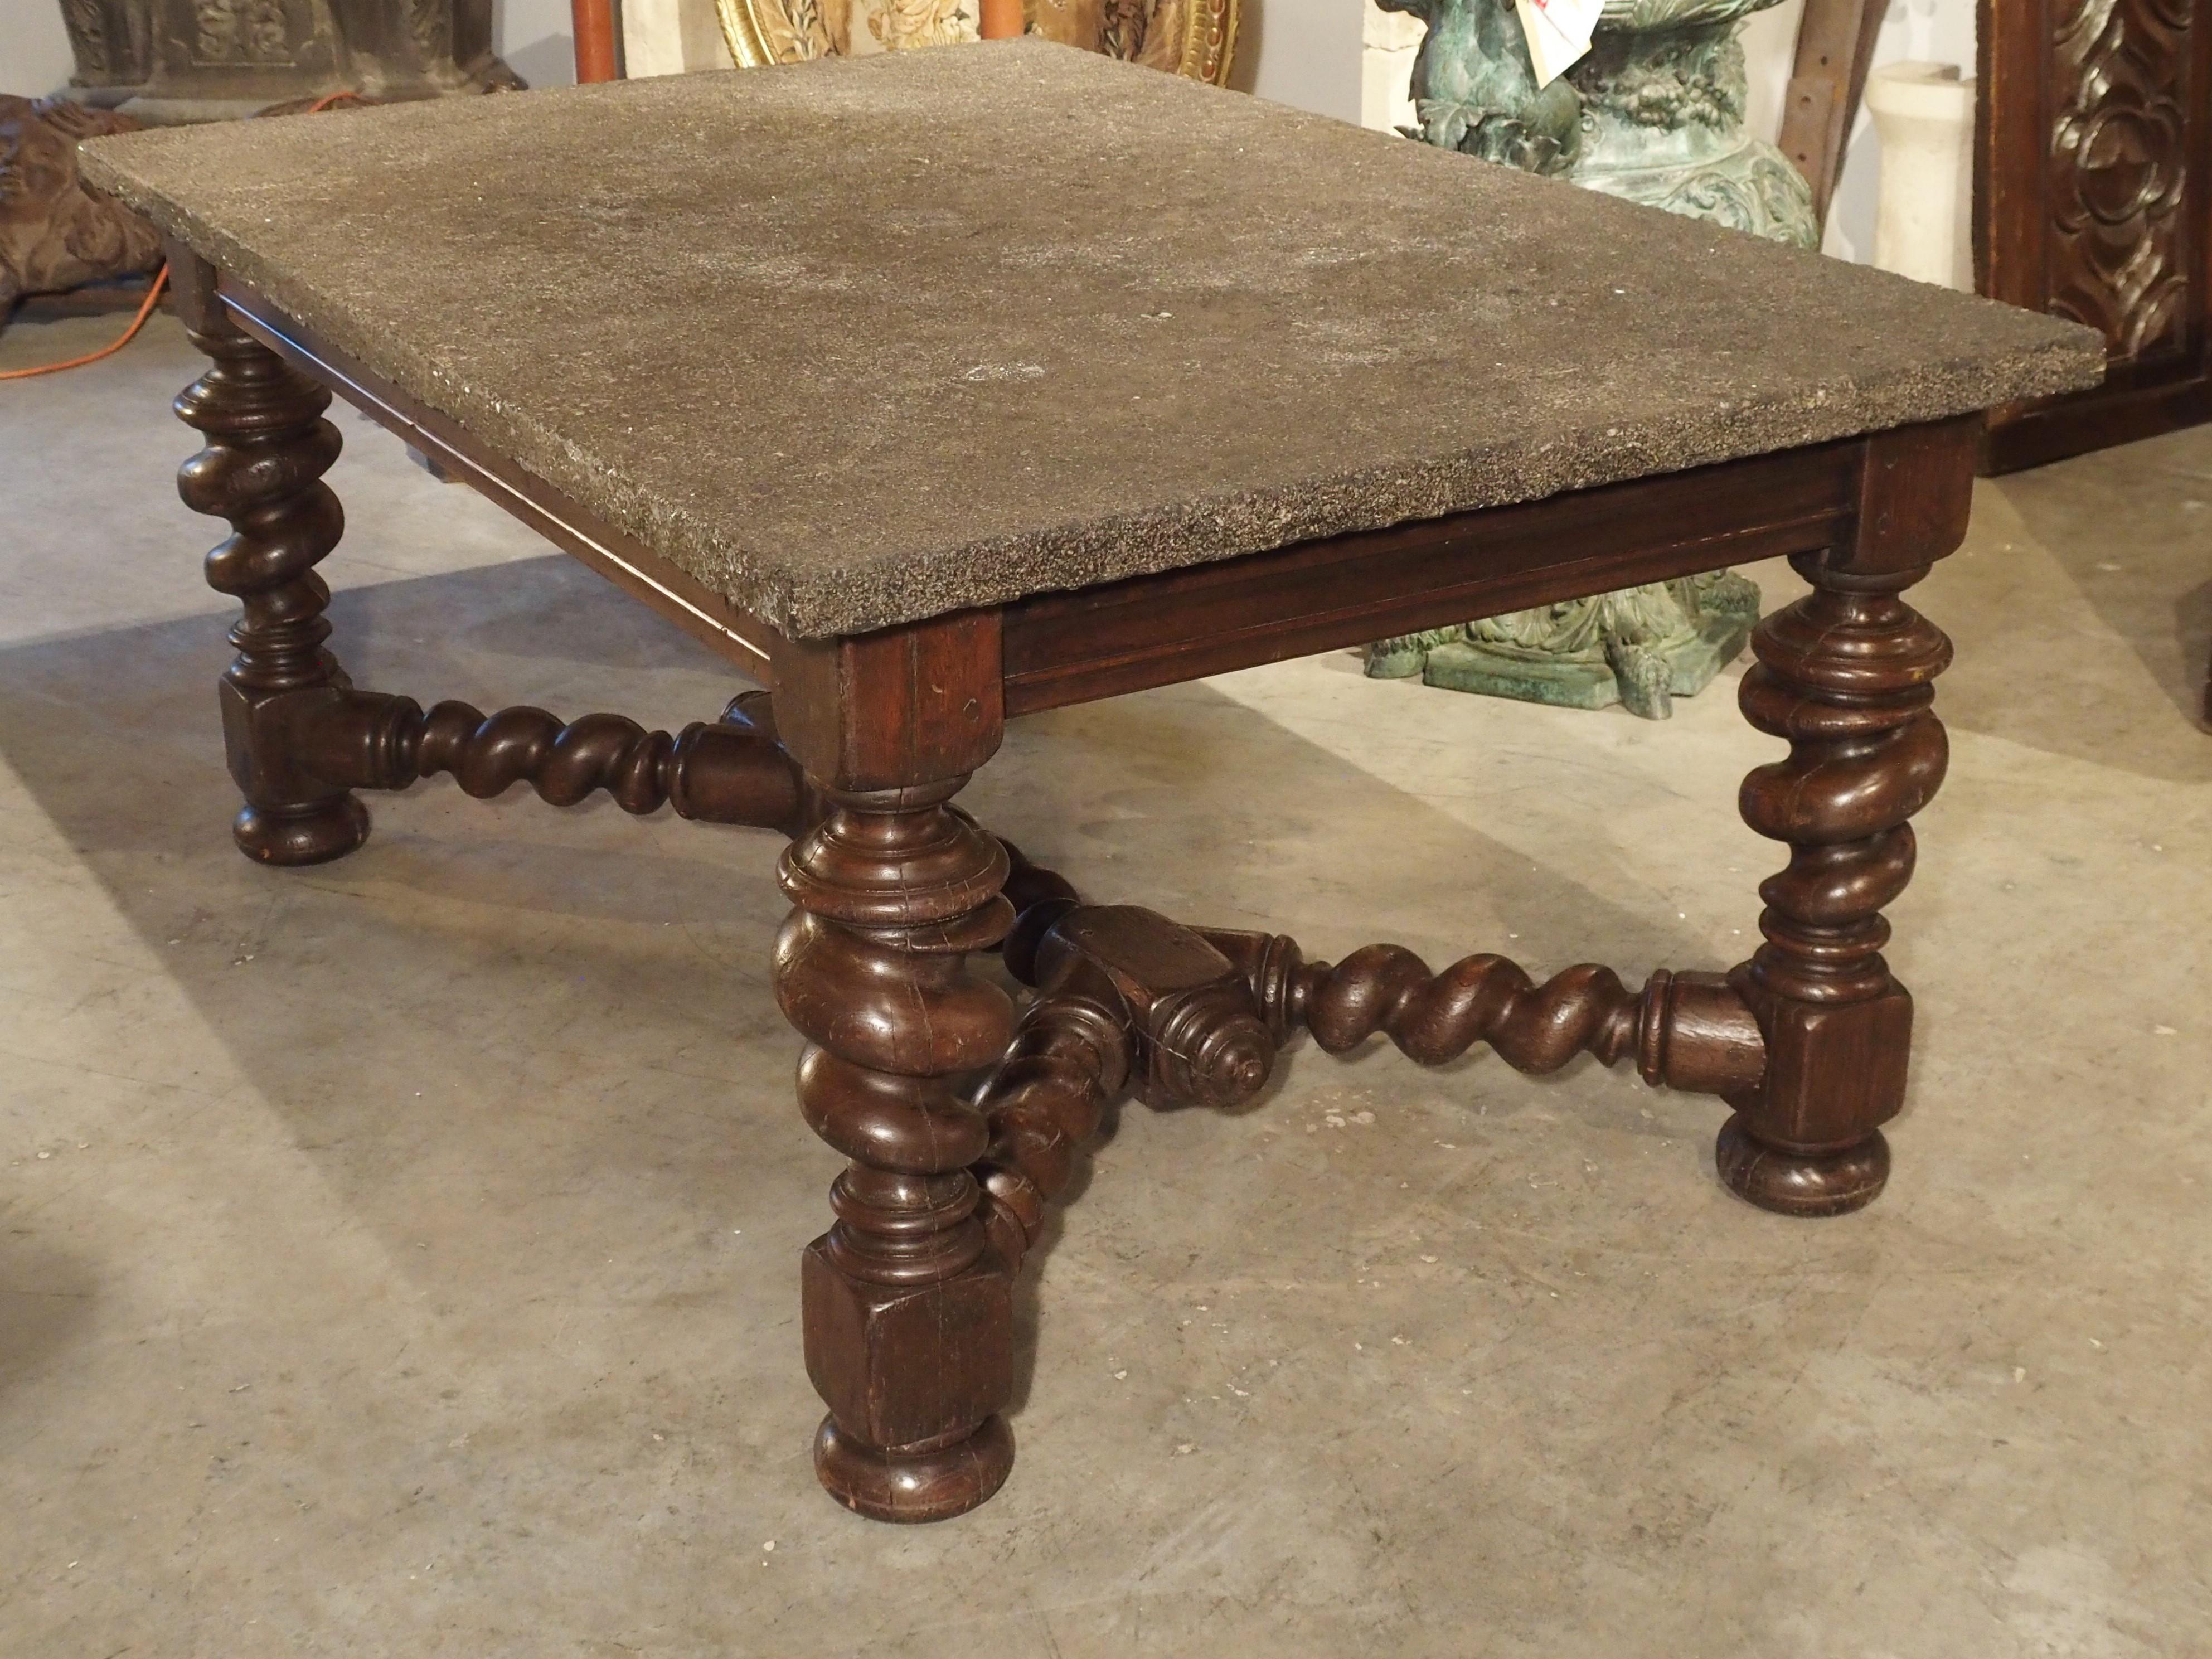 Impressive French Oak Table with Large Turned Legs and Bluestone Top, C. 1850 4